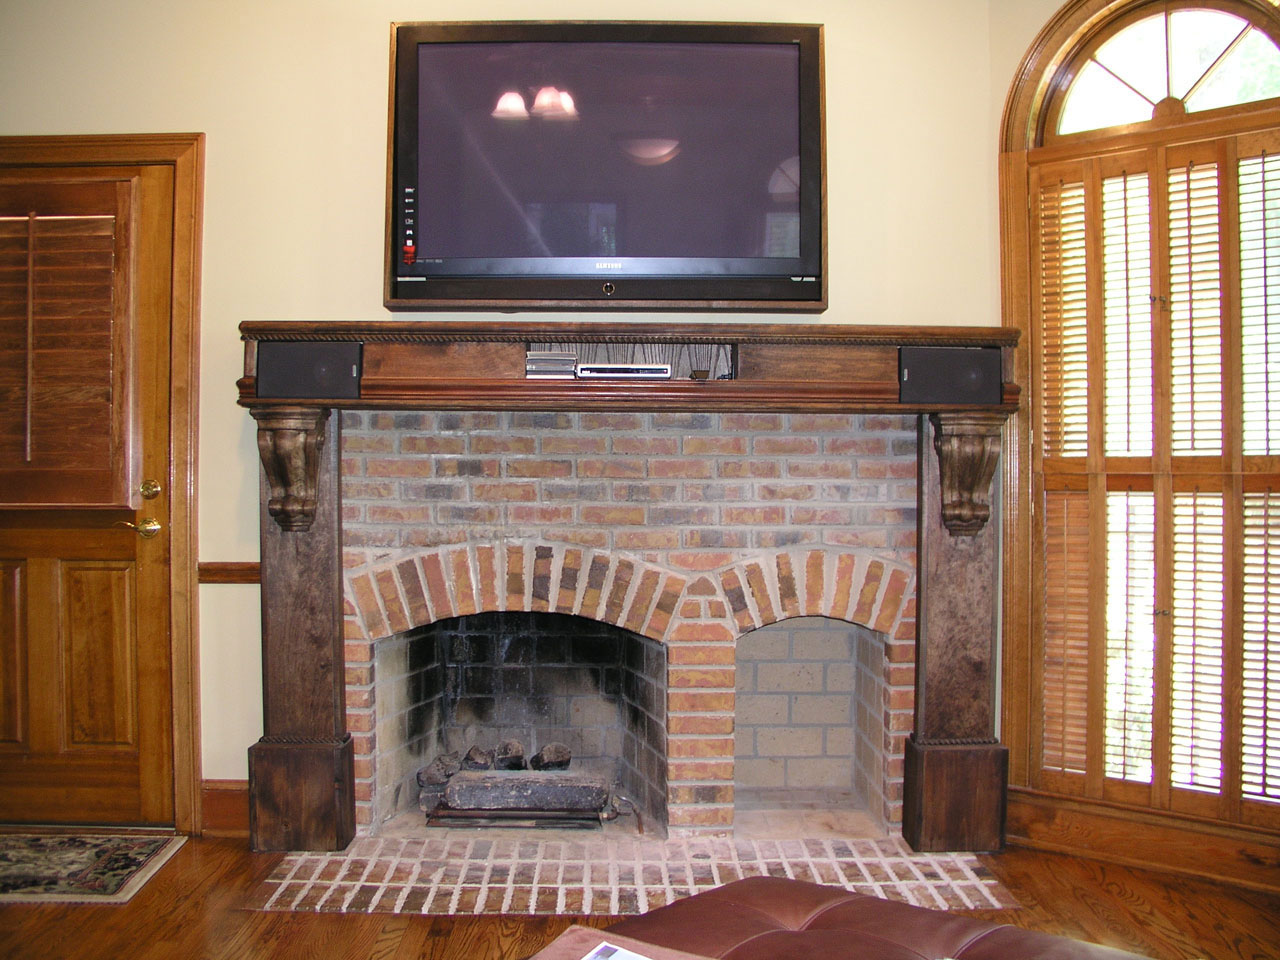 Brick Wooden Mantel Awesome Brick Wooden Frame Fireplace Mantel Designs Ideas Finished With LCD TV For Fireplace Design Made From Brick Decoration  Fireplace Mantel Designs With Rustic Contemporary Style 